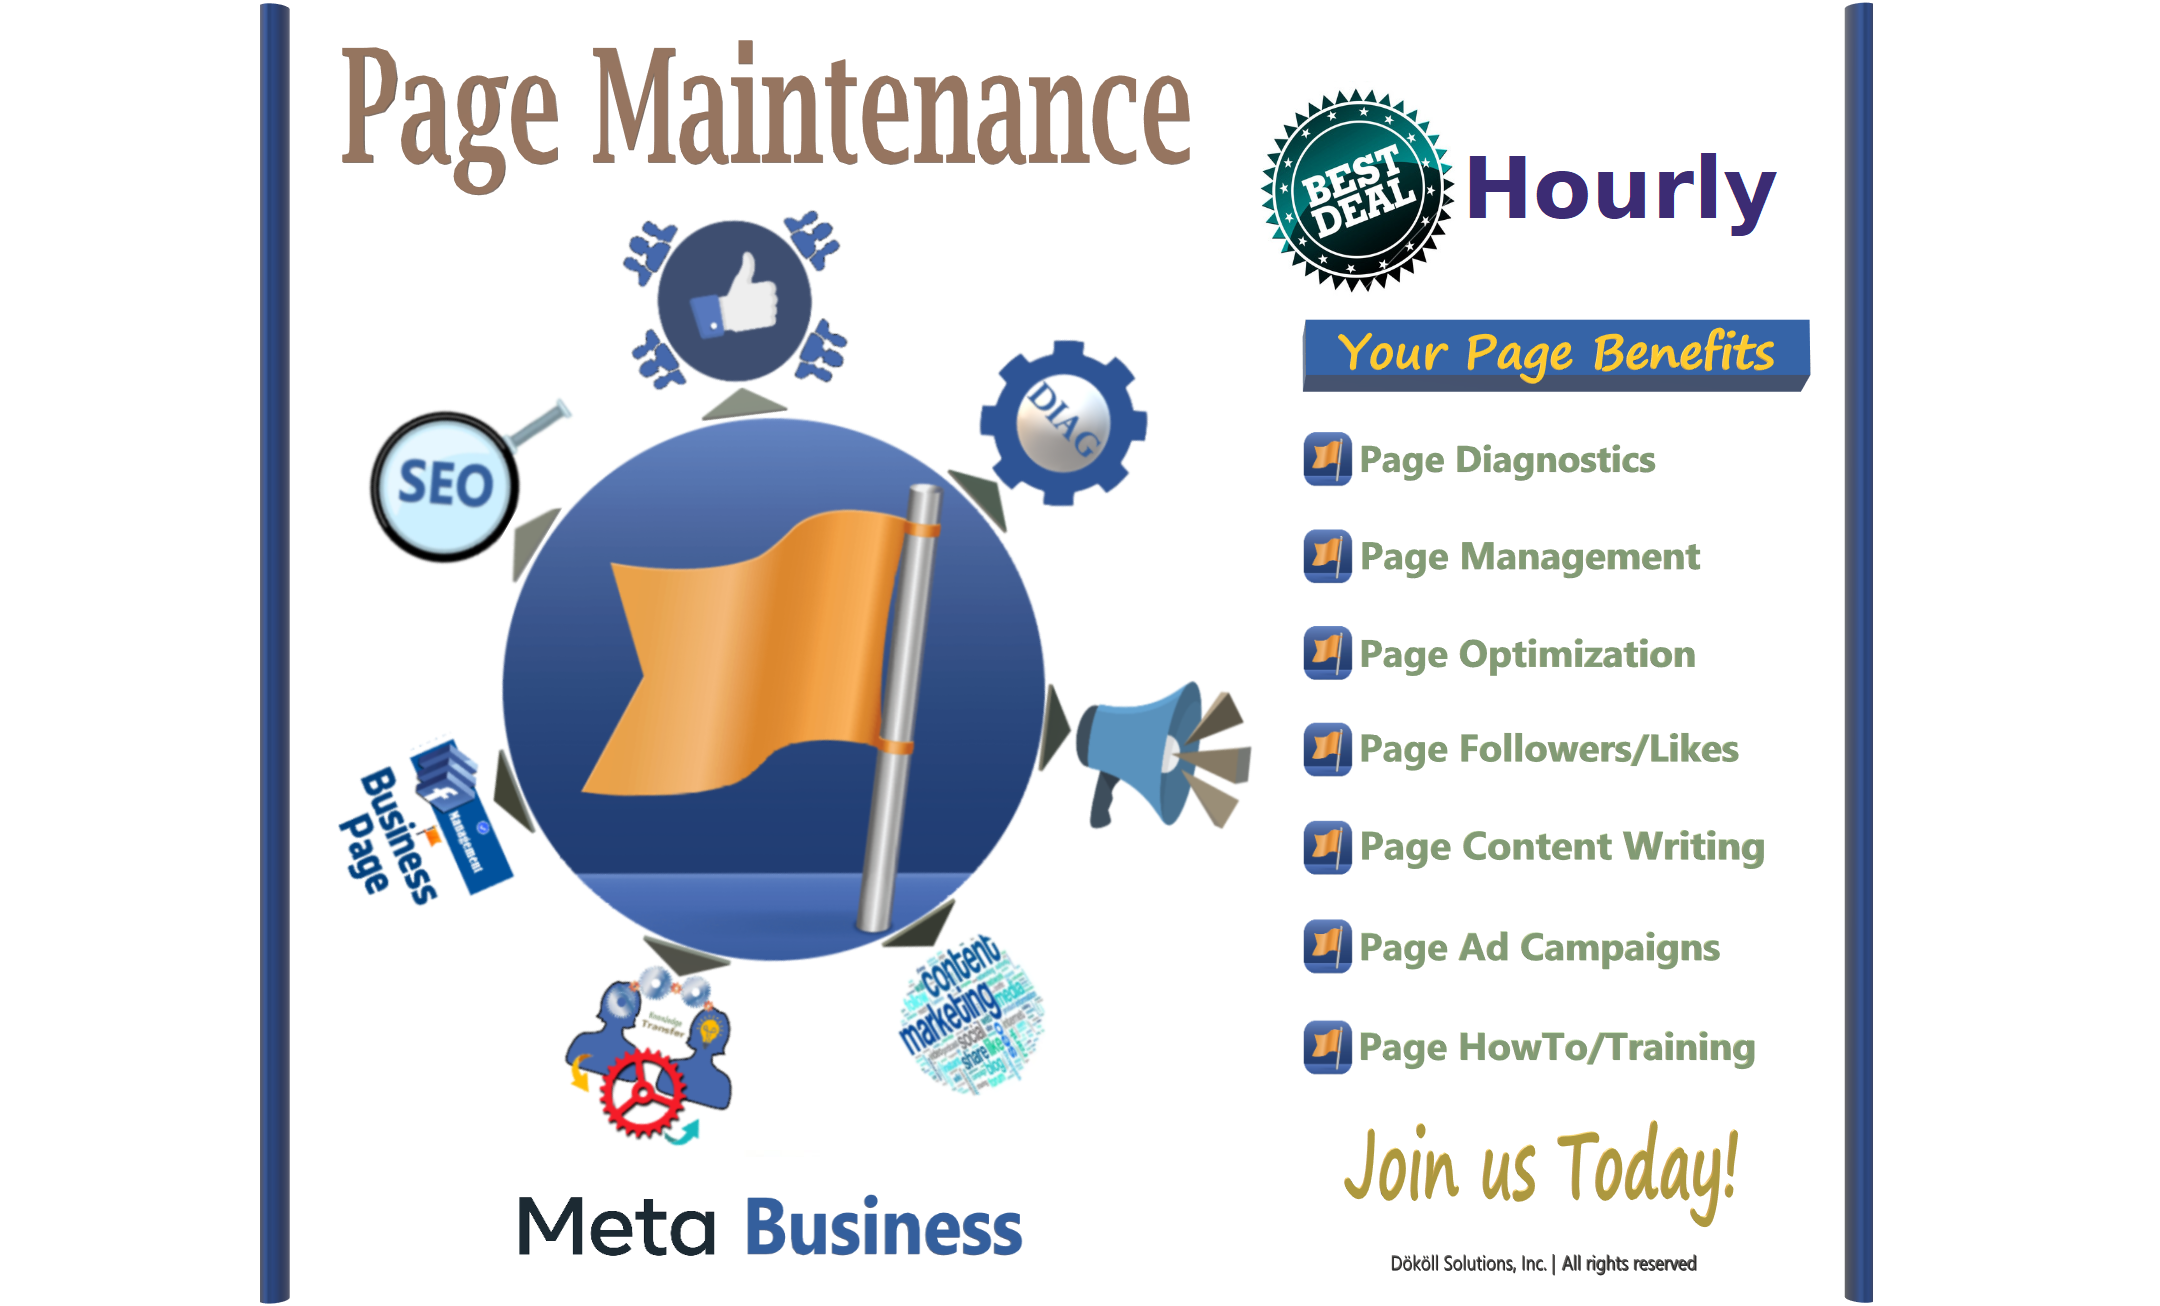 Facebook Hourly Page Services